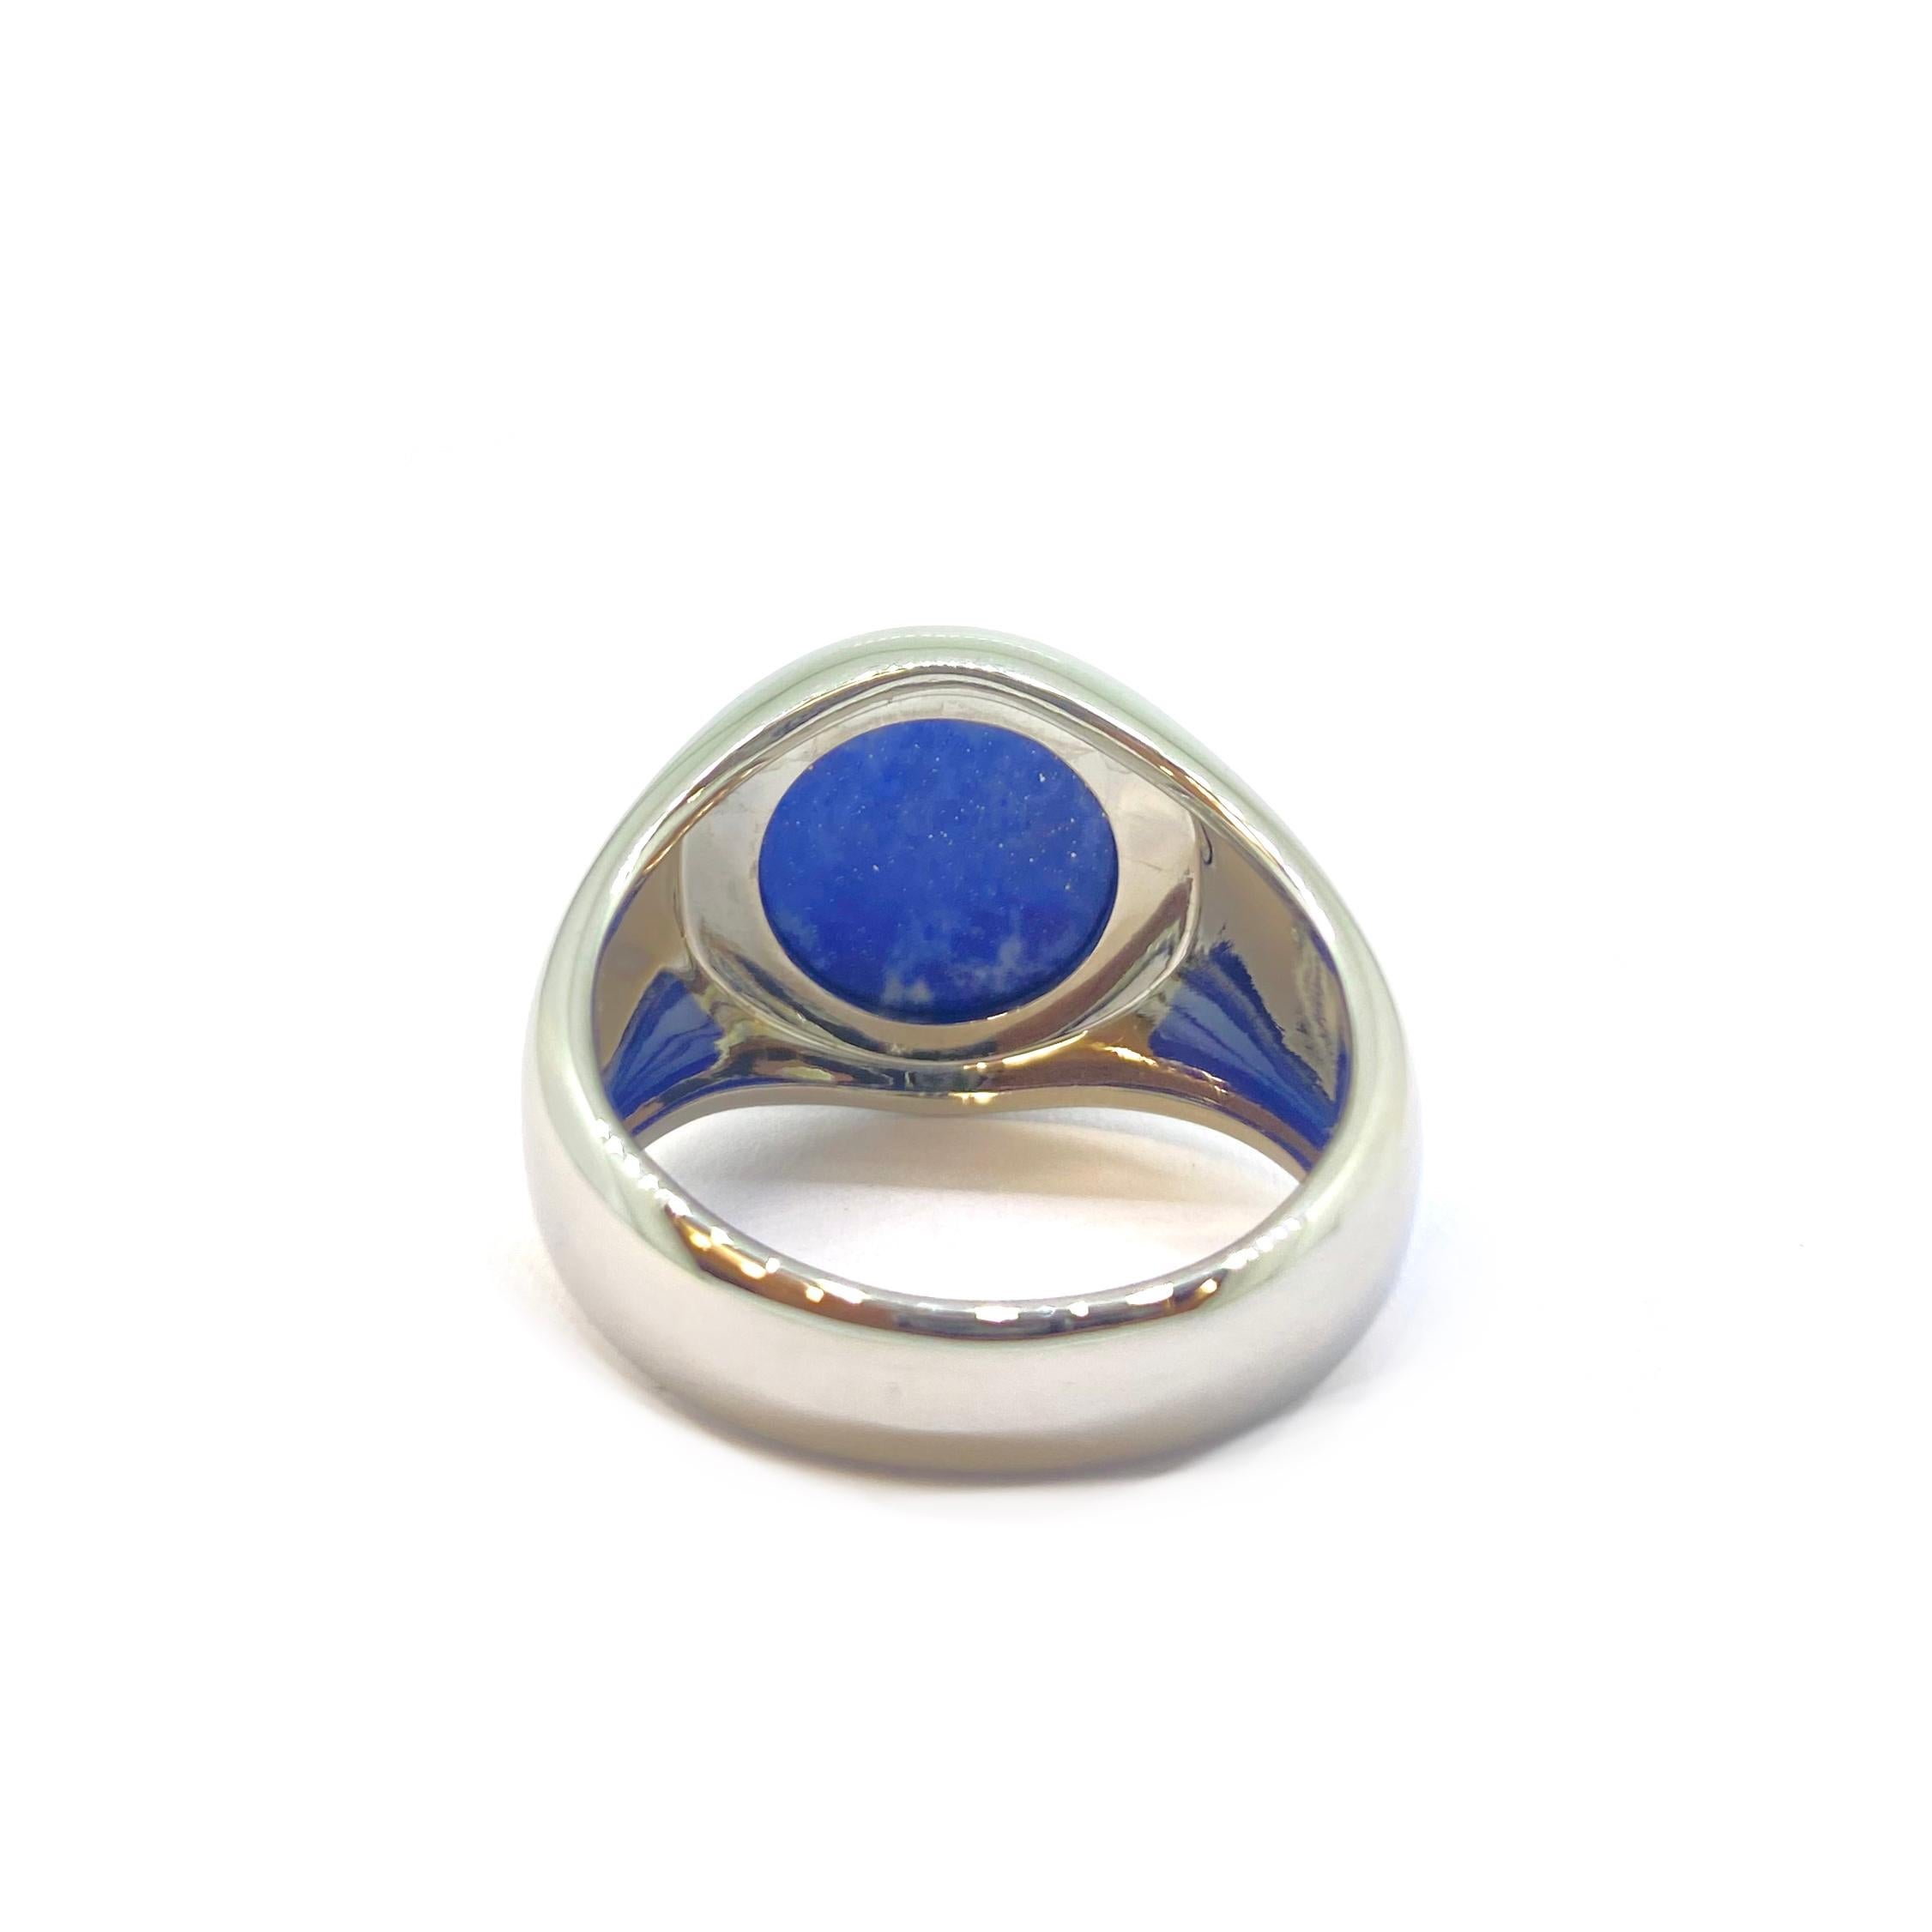 Signet ring made from polished 950 platinum with a round cut lapis/ sodalith cabochon, 5.97ct.

Ringsize: 62, 5.1mm wide and 1.6mm thick on bottom, 16.55mmØ and 6.0mm thick on top

17.23g of 950 Platinum

 

 

Lesunja's men's collection is a